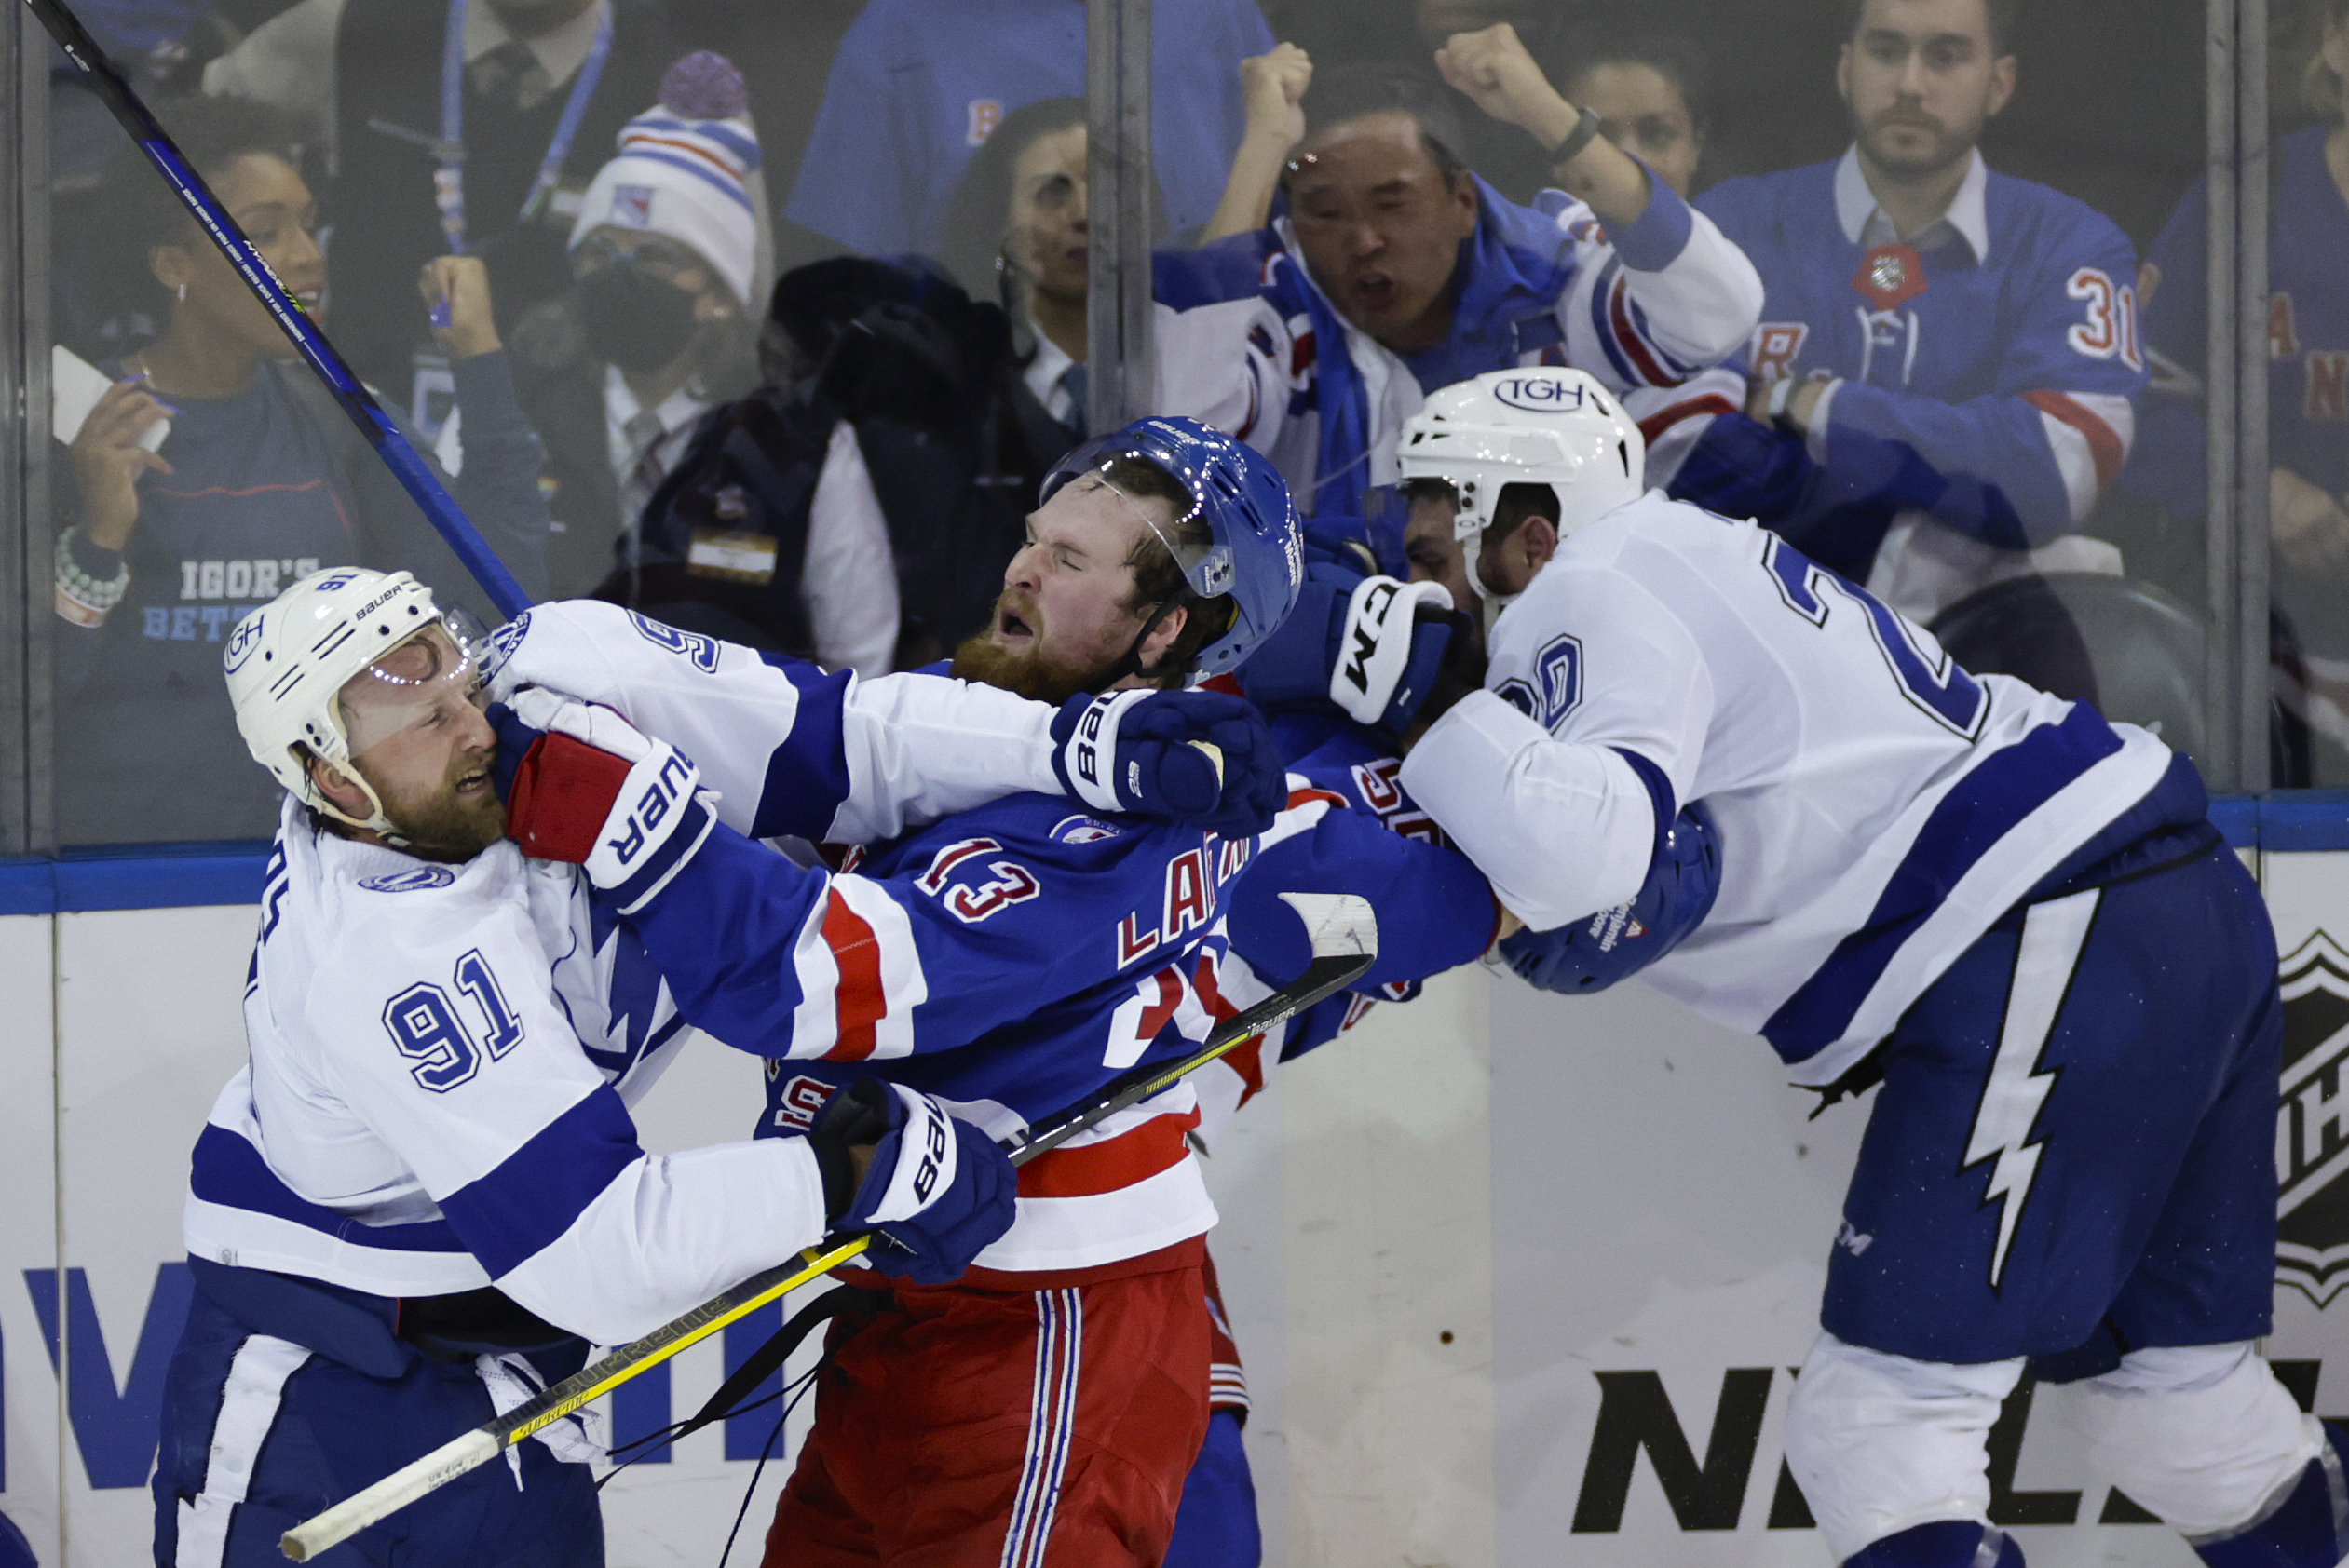 For Tampa Bay, a Win Over the Rangers Comes at an Opportune Time